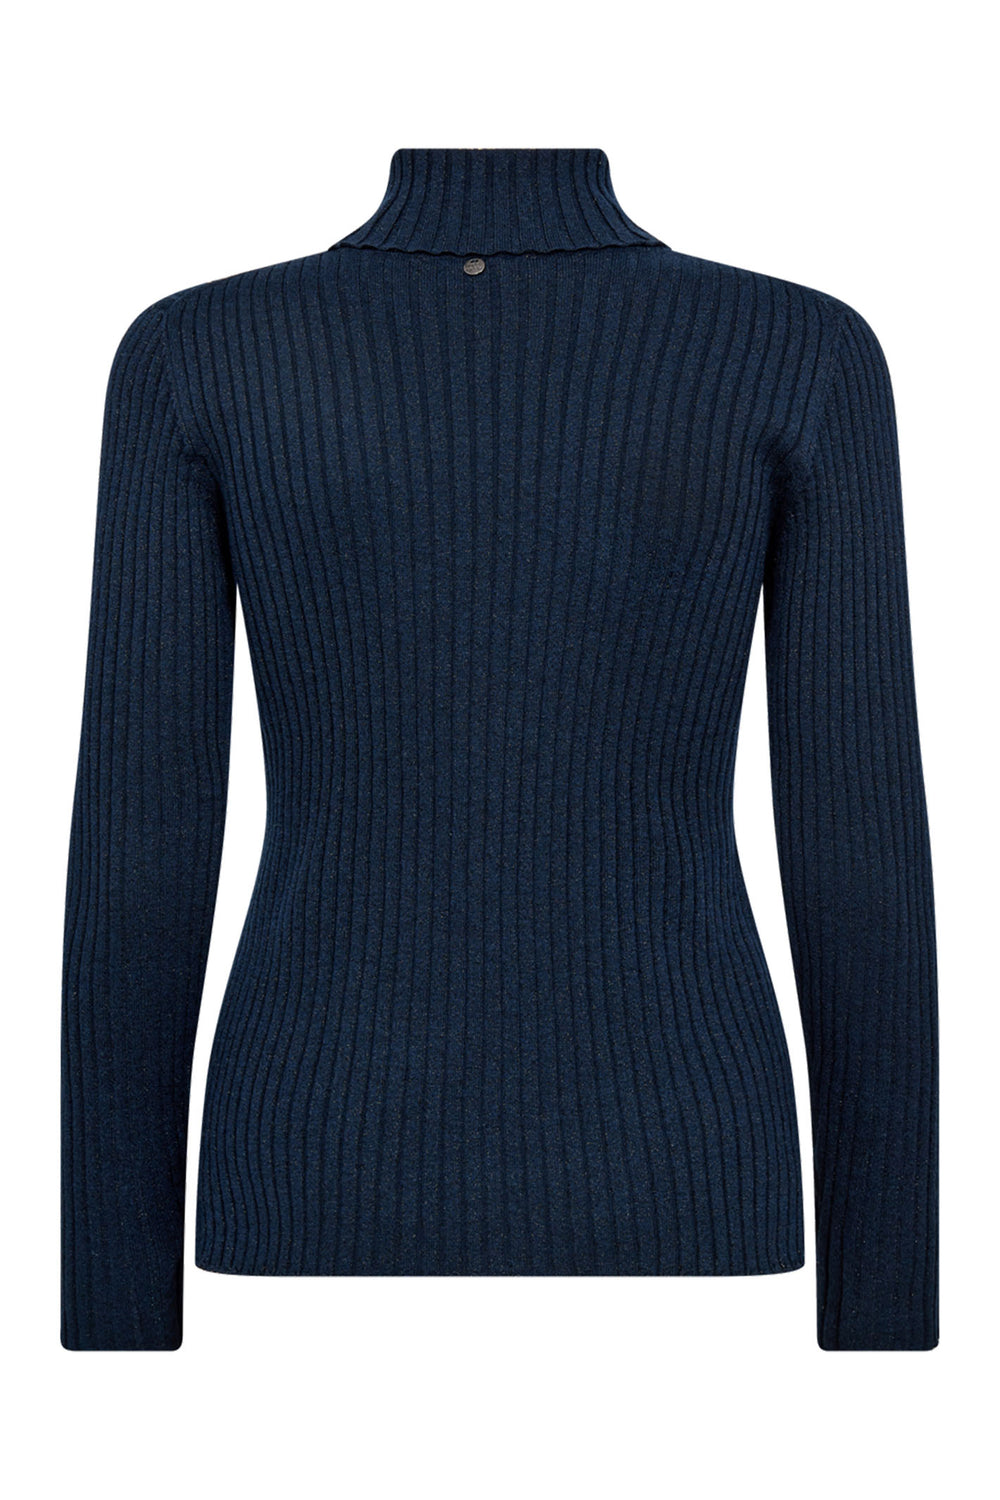 Mos Mosh 158120 MMRelena Pageant Blue Rib Lux Rollneck Jumper - Dotique Chesterfield